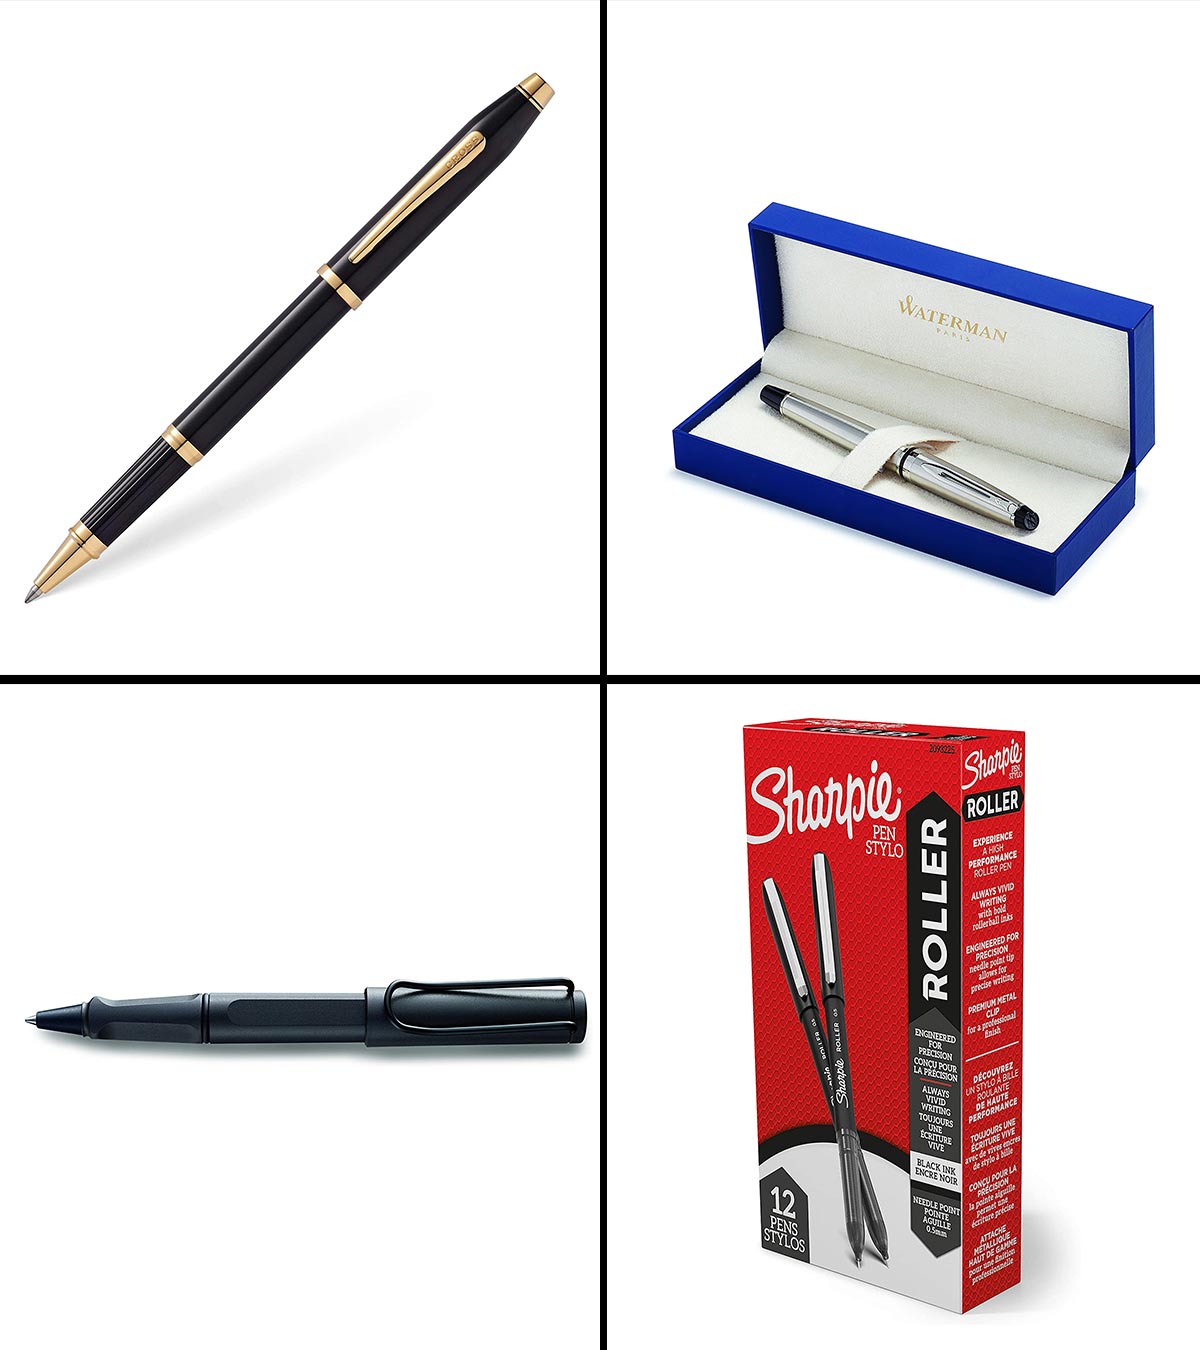 Which ball pen is best for long writing below Rs. 200? - Quora